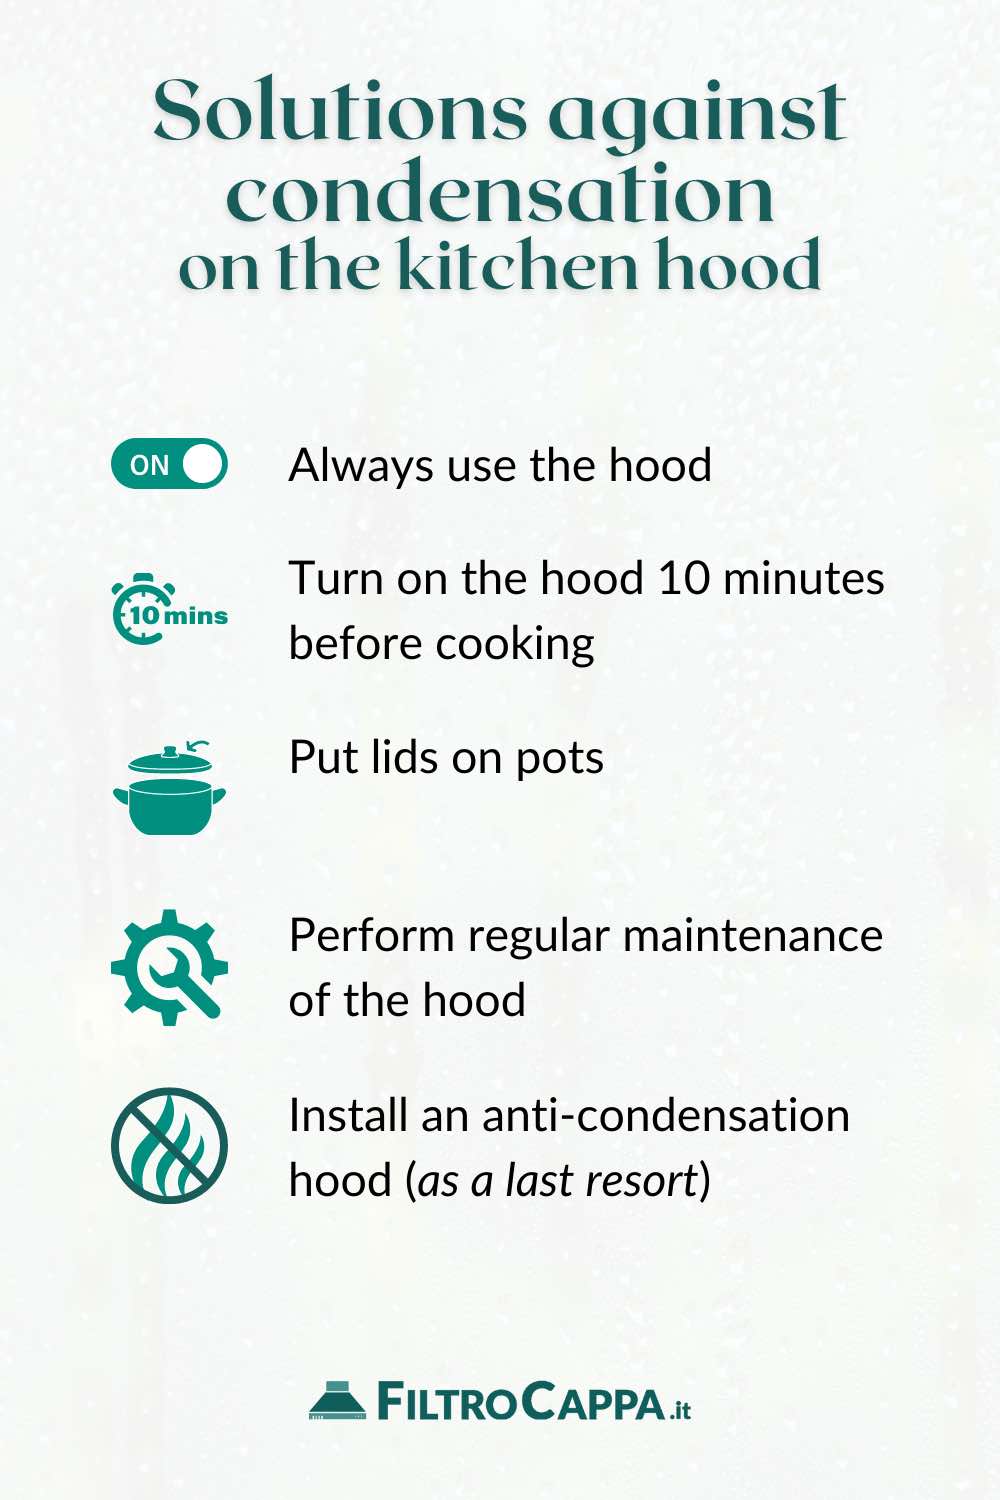 Solutions against condensation on kitchen hood